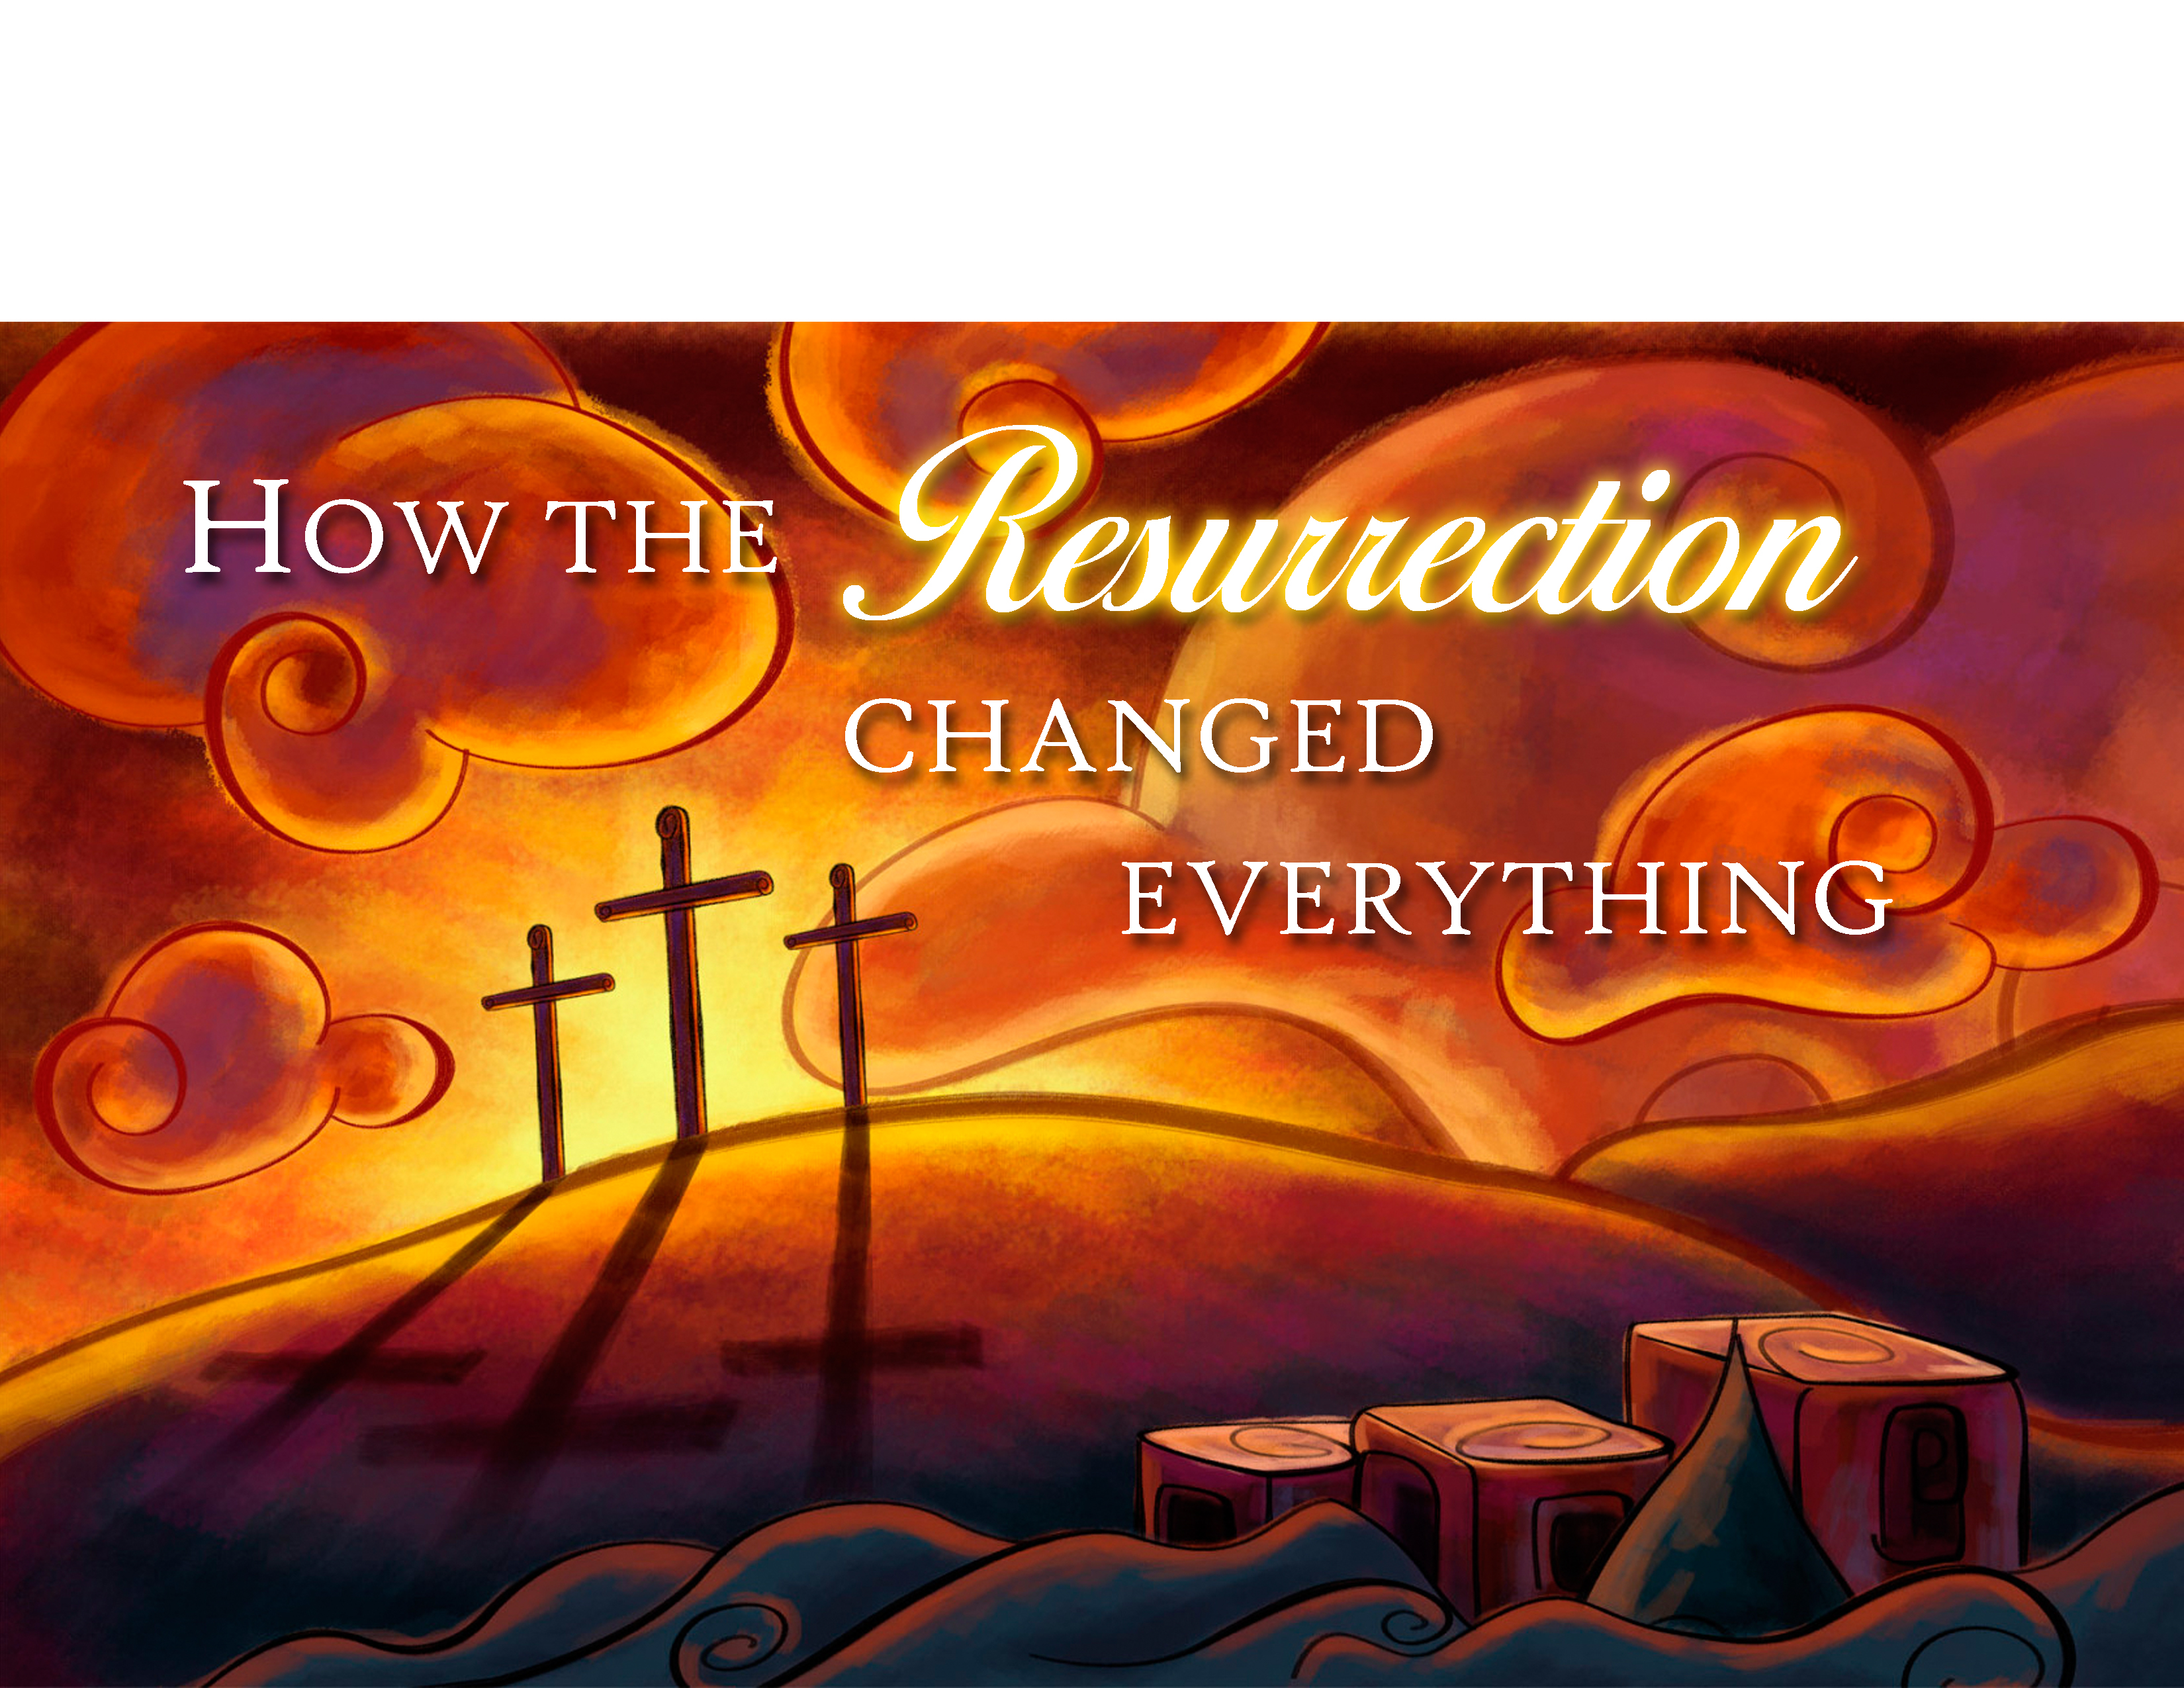 04-20-14 How The Resurrection Changed Everything Part 2